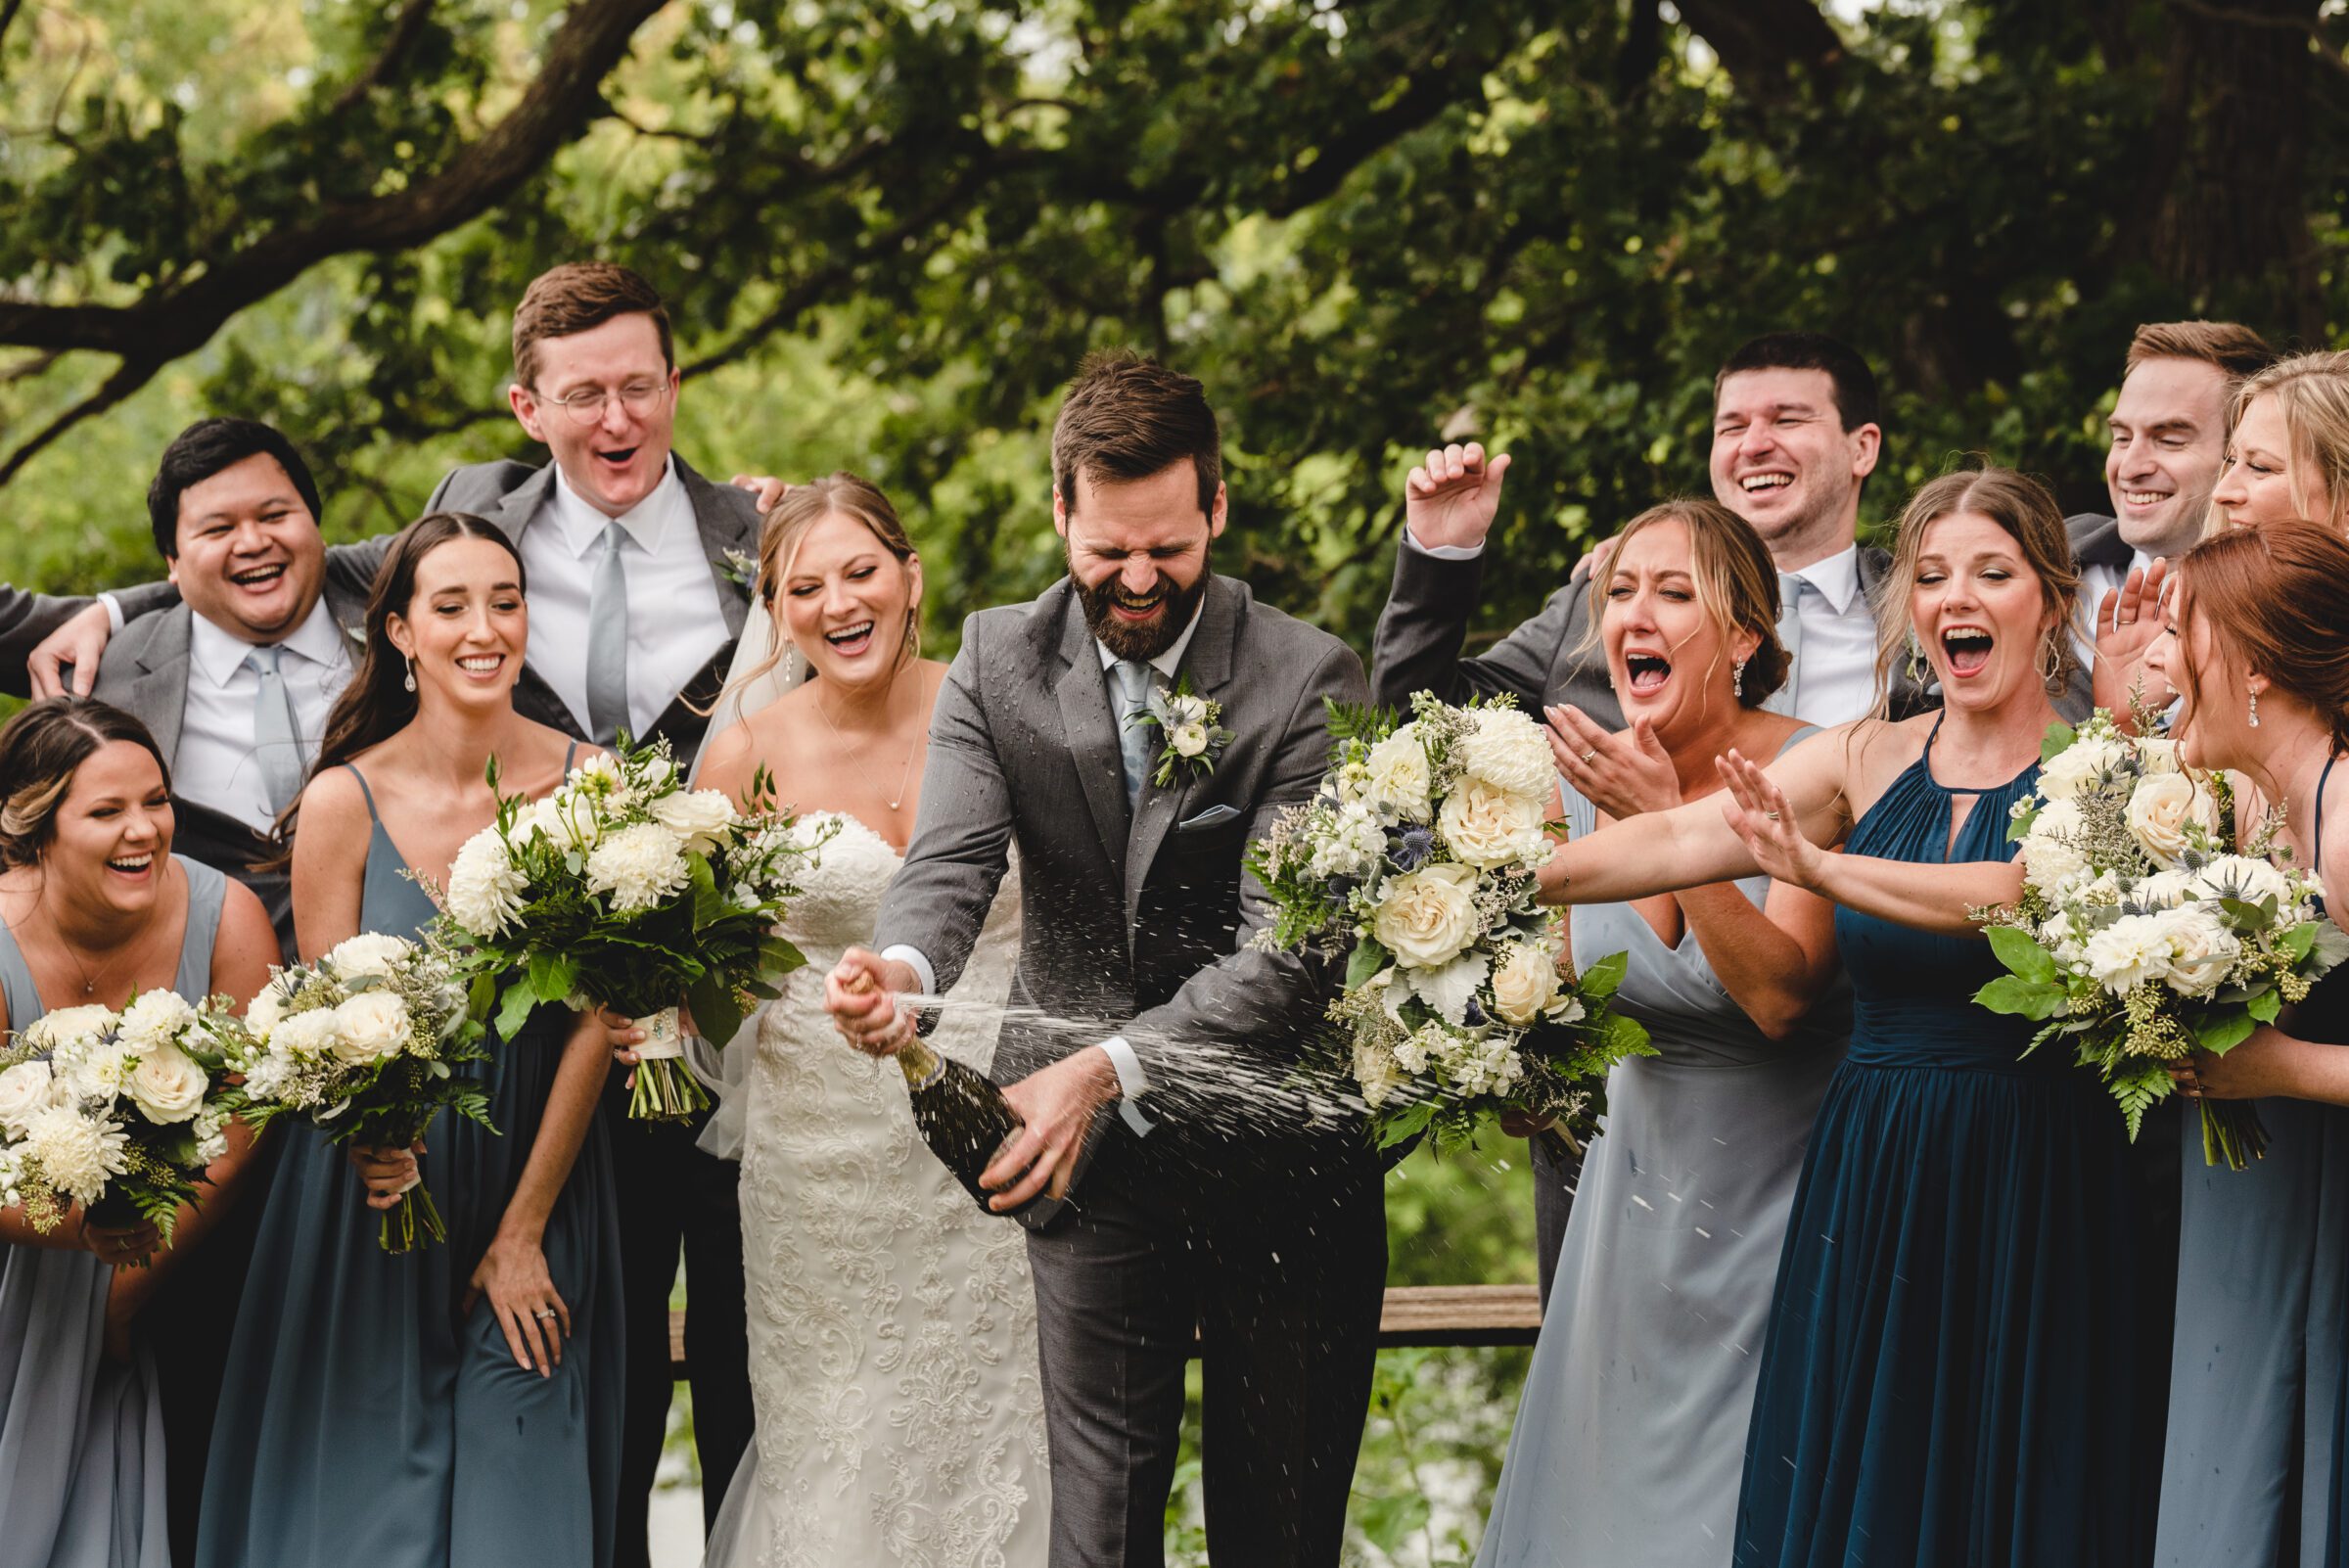 how to have actual fun with wedding parties